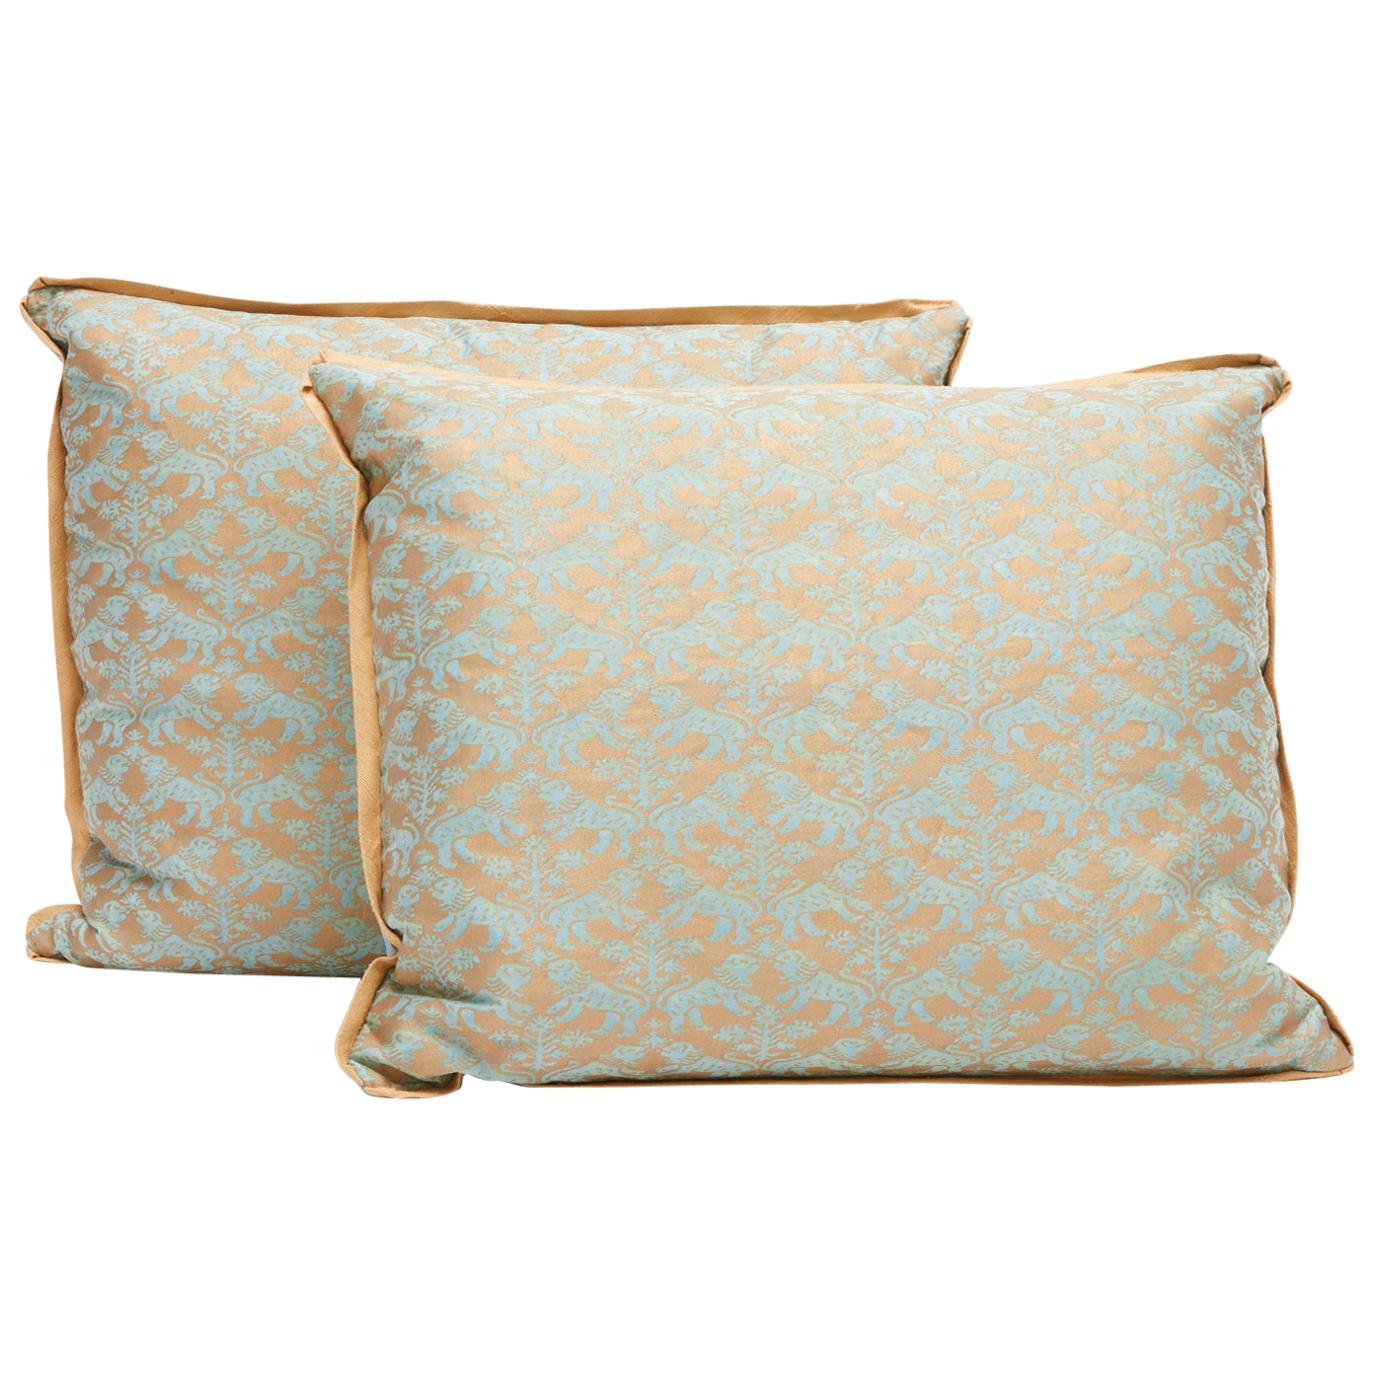 Pair of Fortuny Fabric Cushions in the Richelieu Pattern